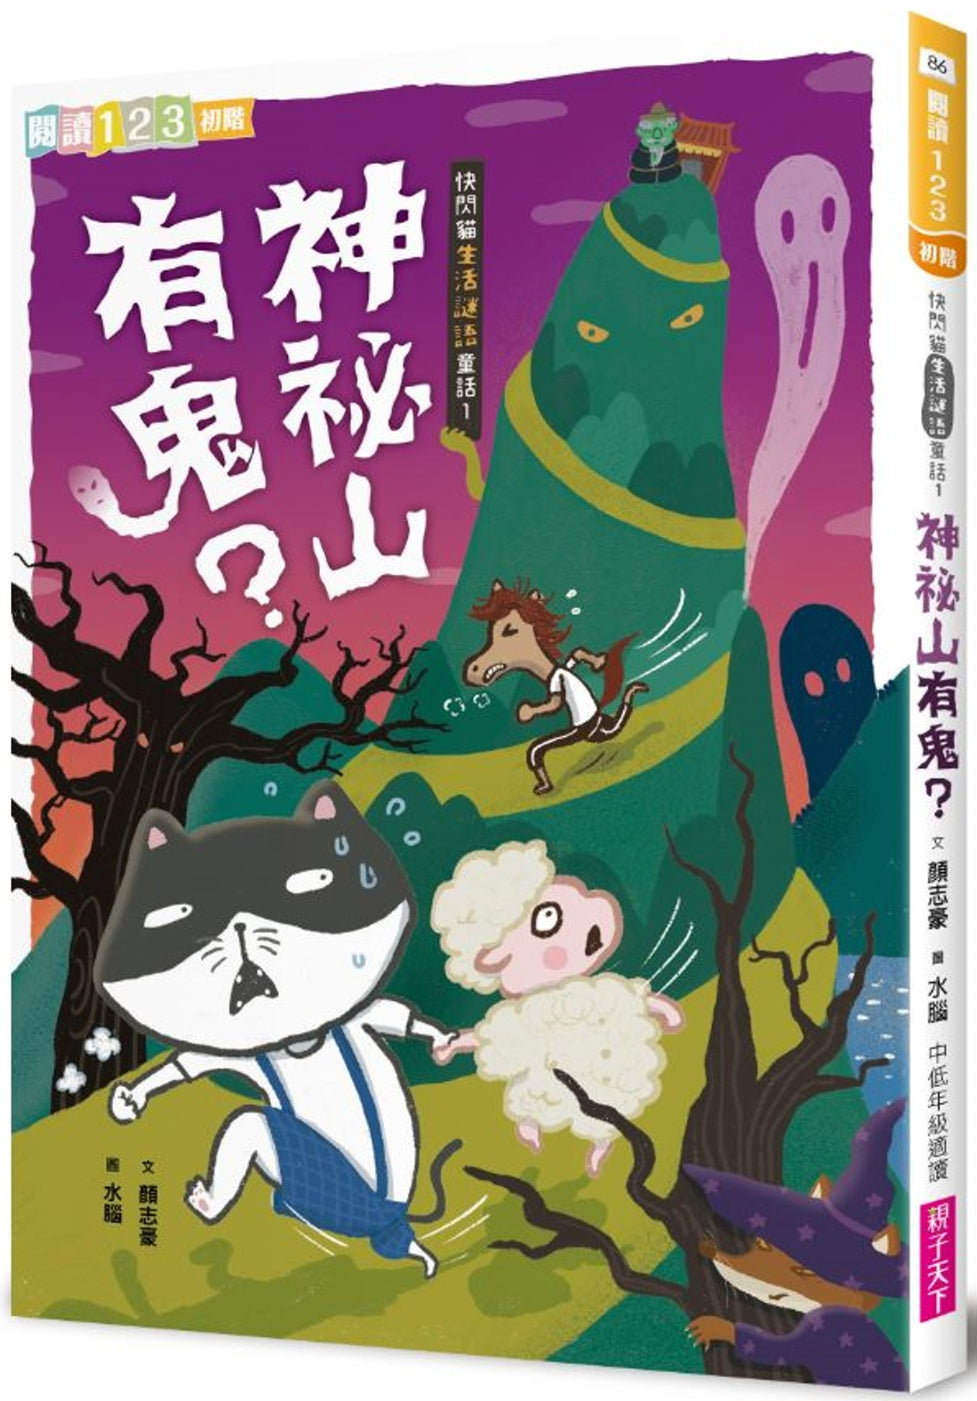 Flash Kitty's Riddles & Stories: Are There Ghosts on Mount Mystery? • 快閃貓生活謎語童話1：神祕山有鬼？